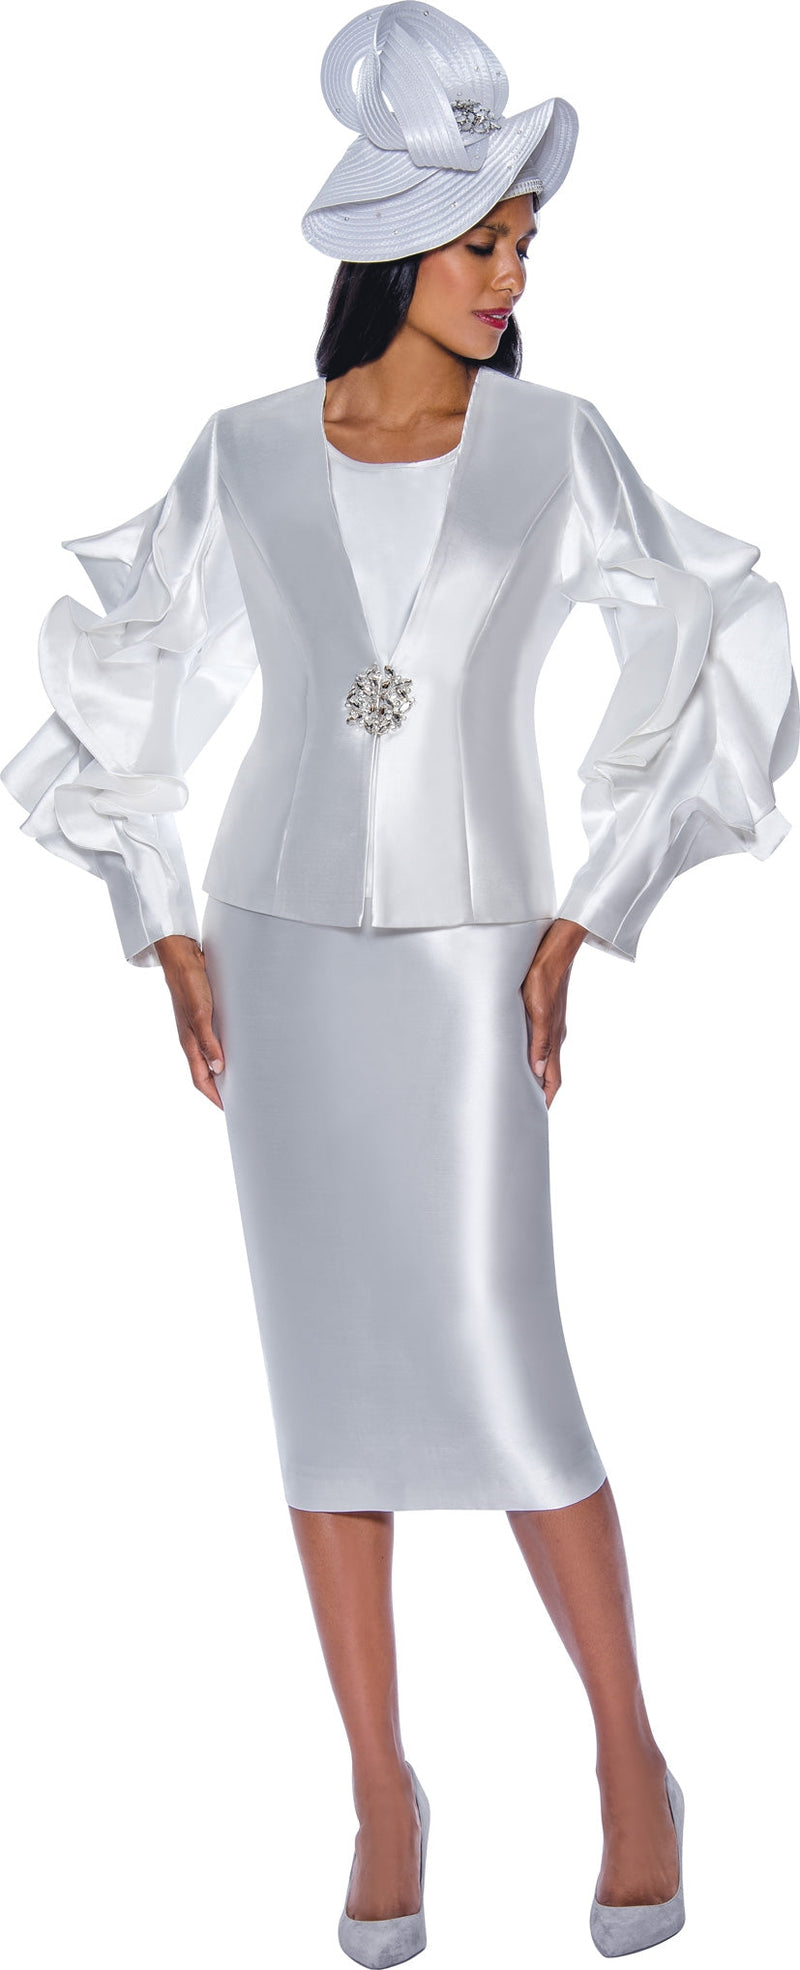 GMI Church Suit 9153-White - Church Suits For Less